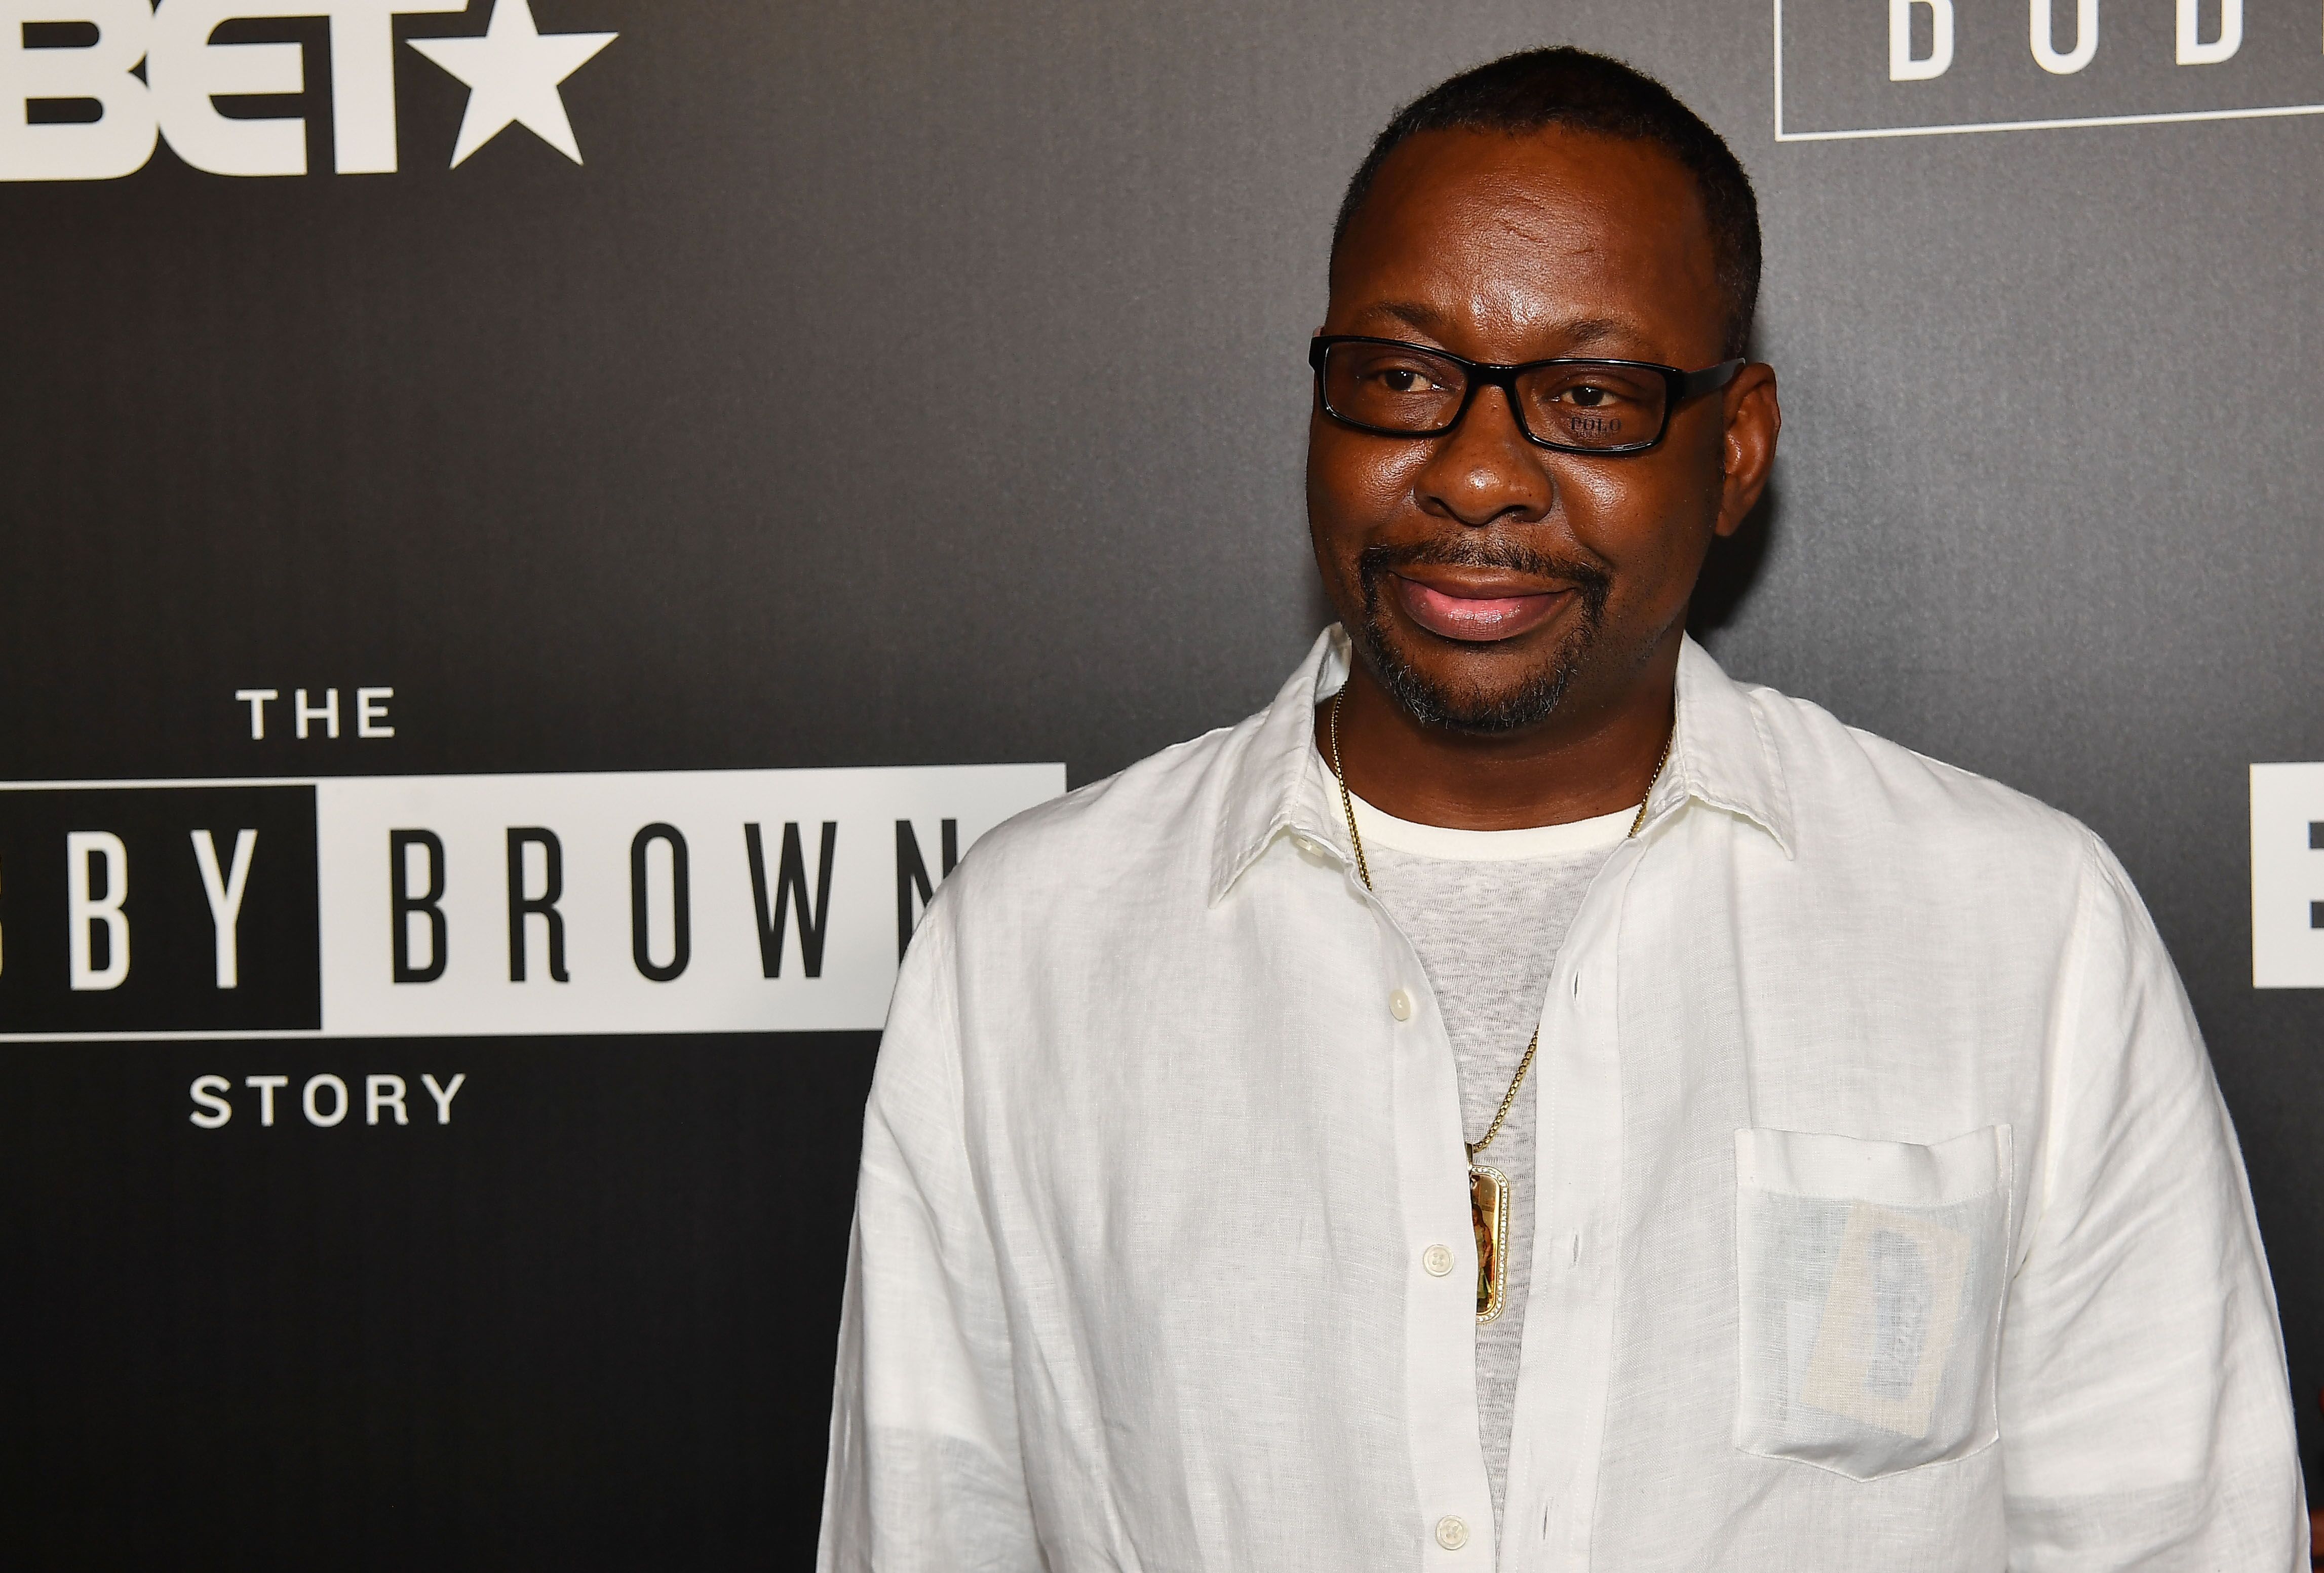 Bobby Brown at the premiere of "The Bobby Brown Story" in Atlanta in 2018 | Source: Getty Images